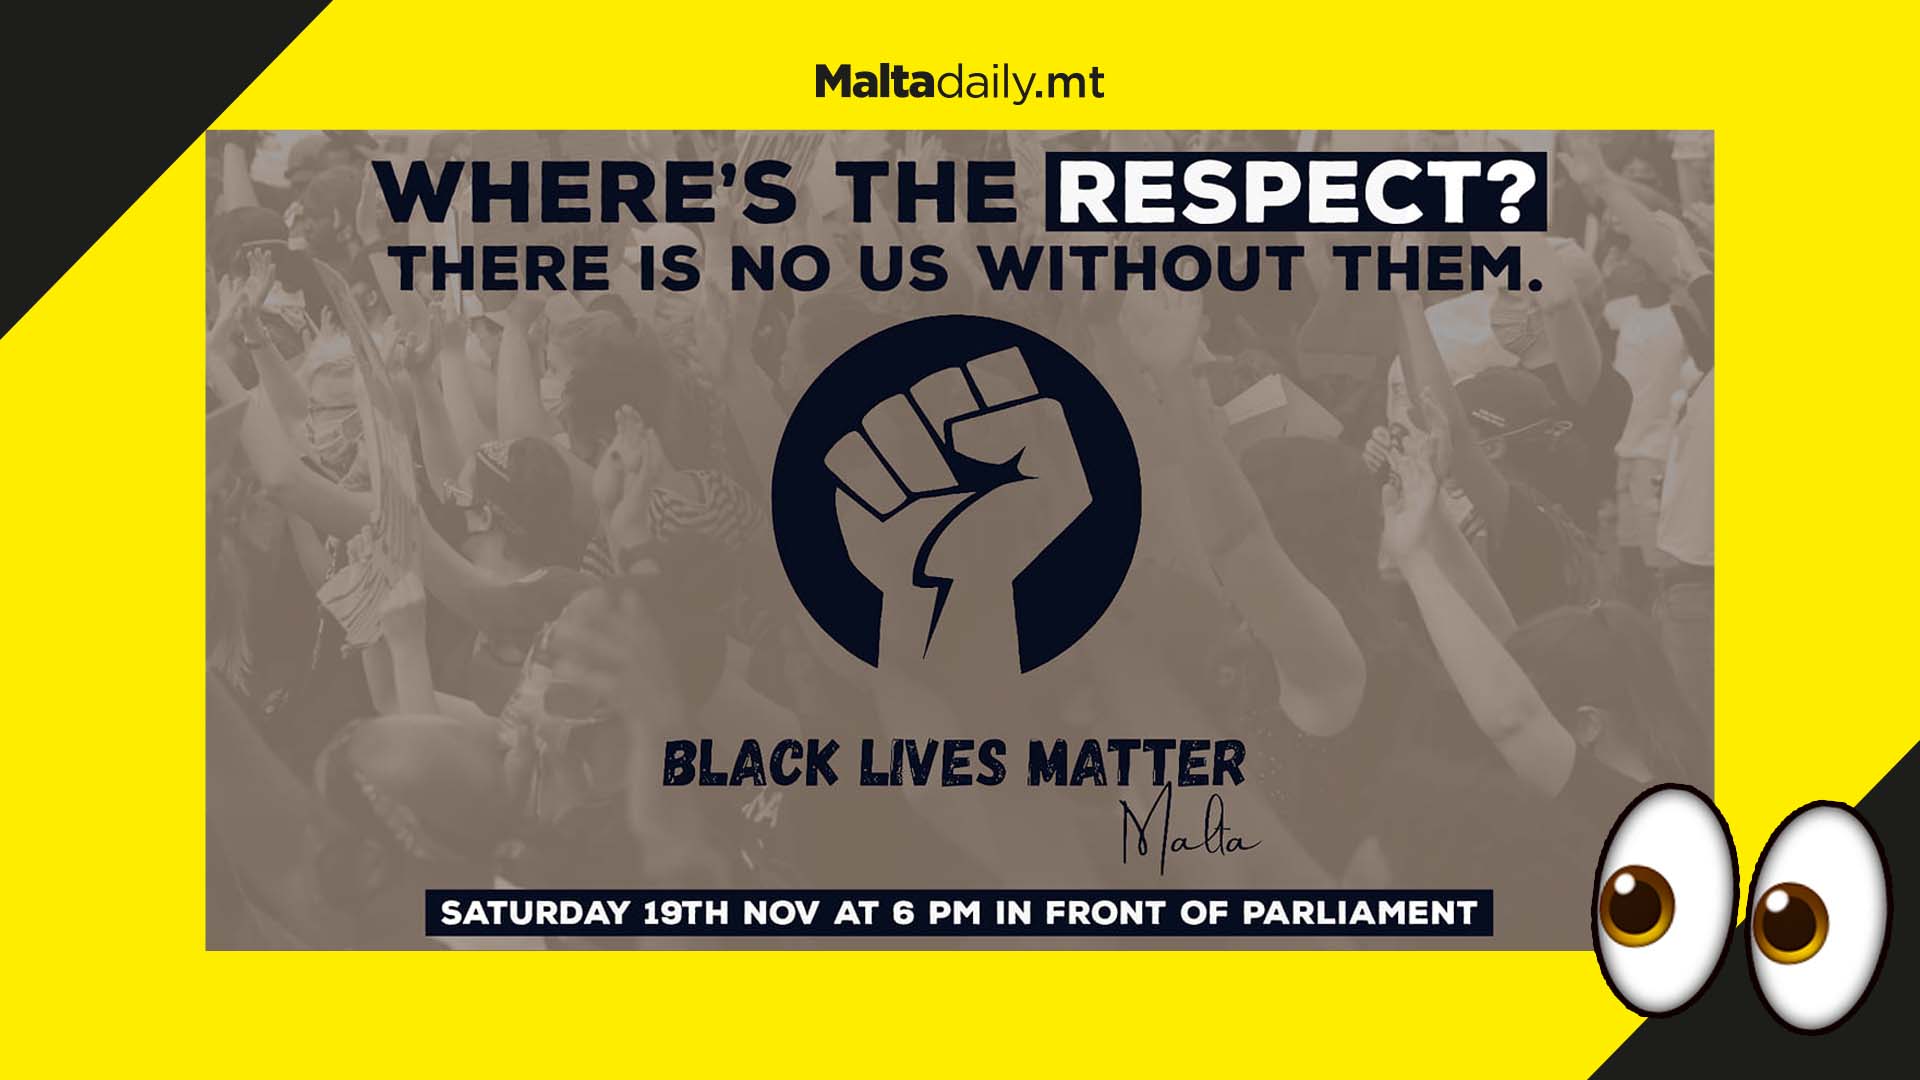 Black Lives Matter protest in front of parliament this Saturday